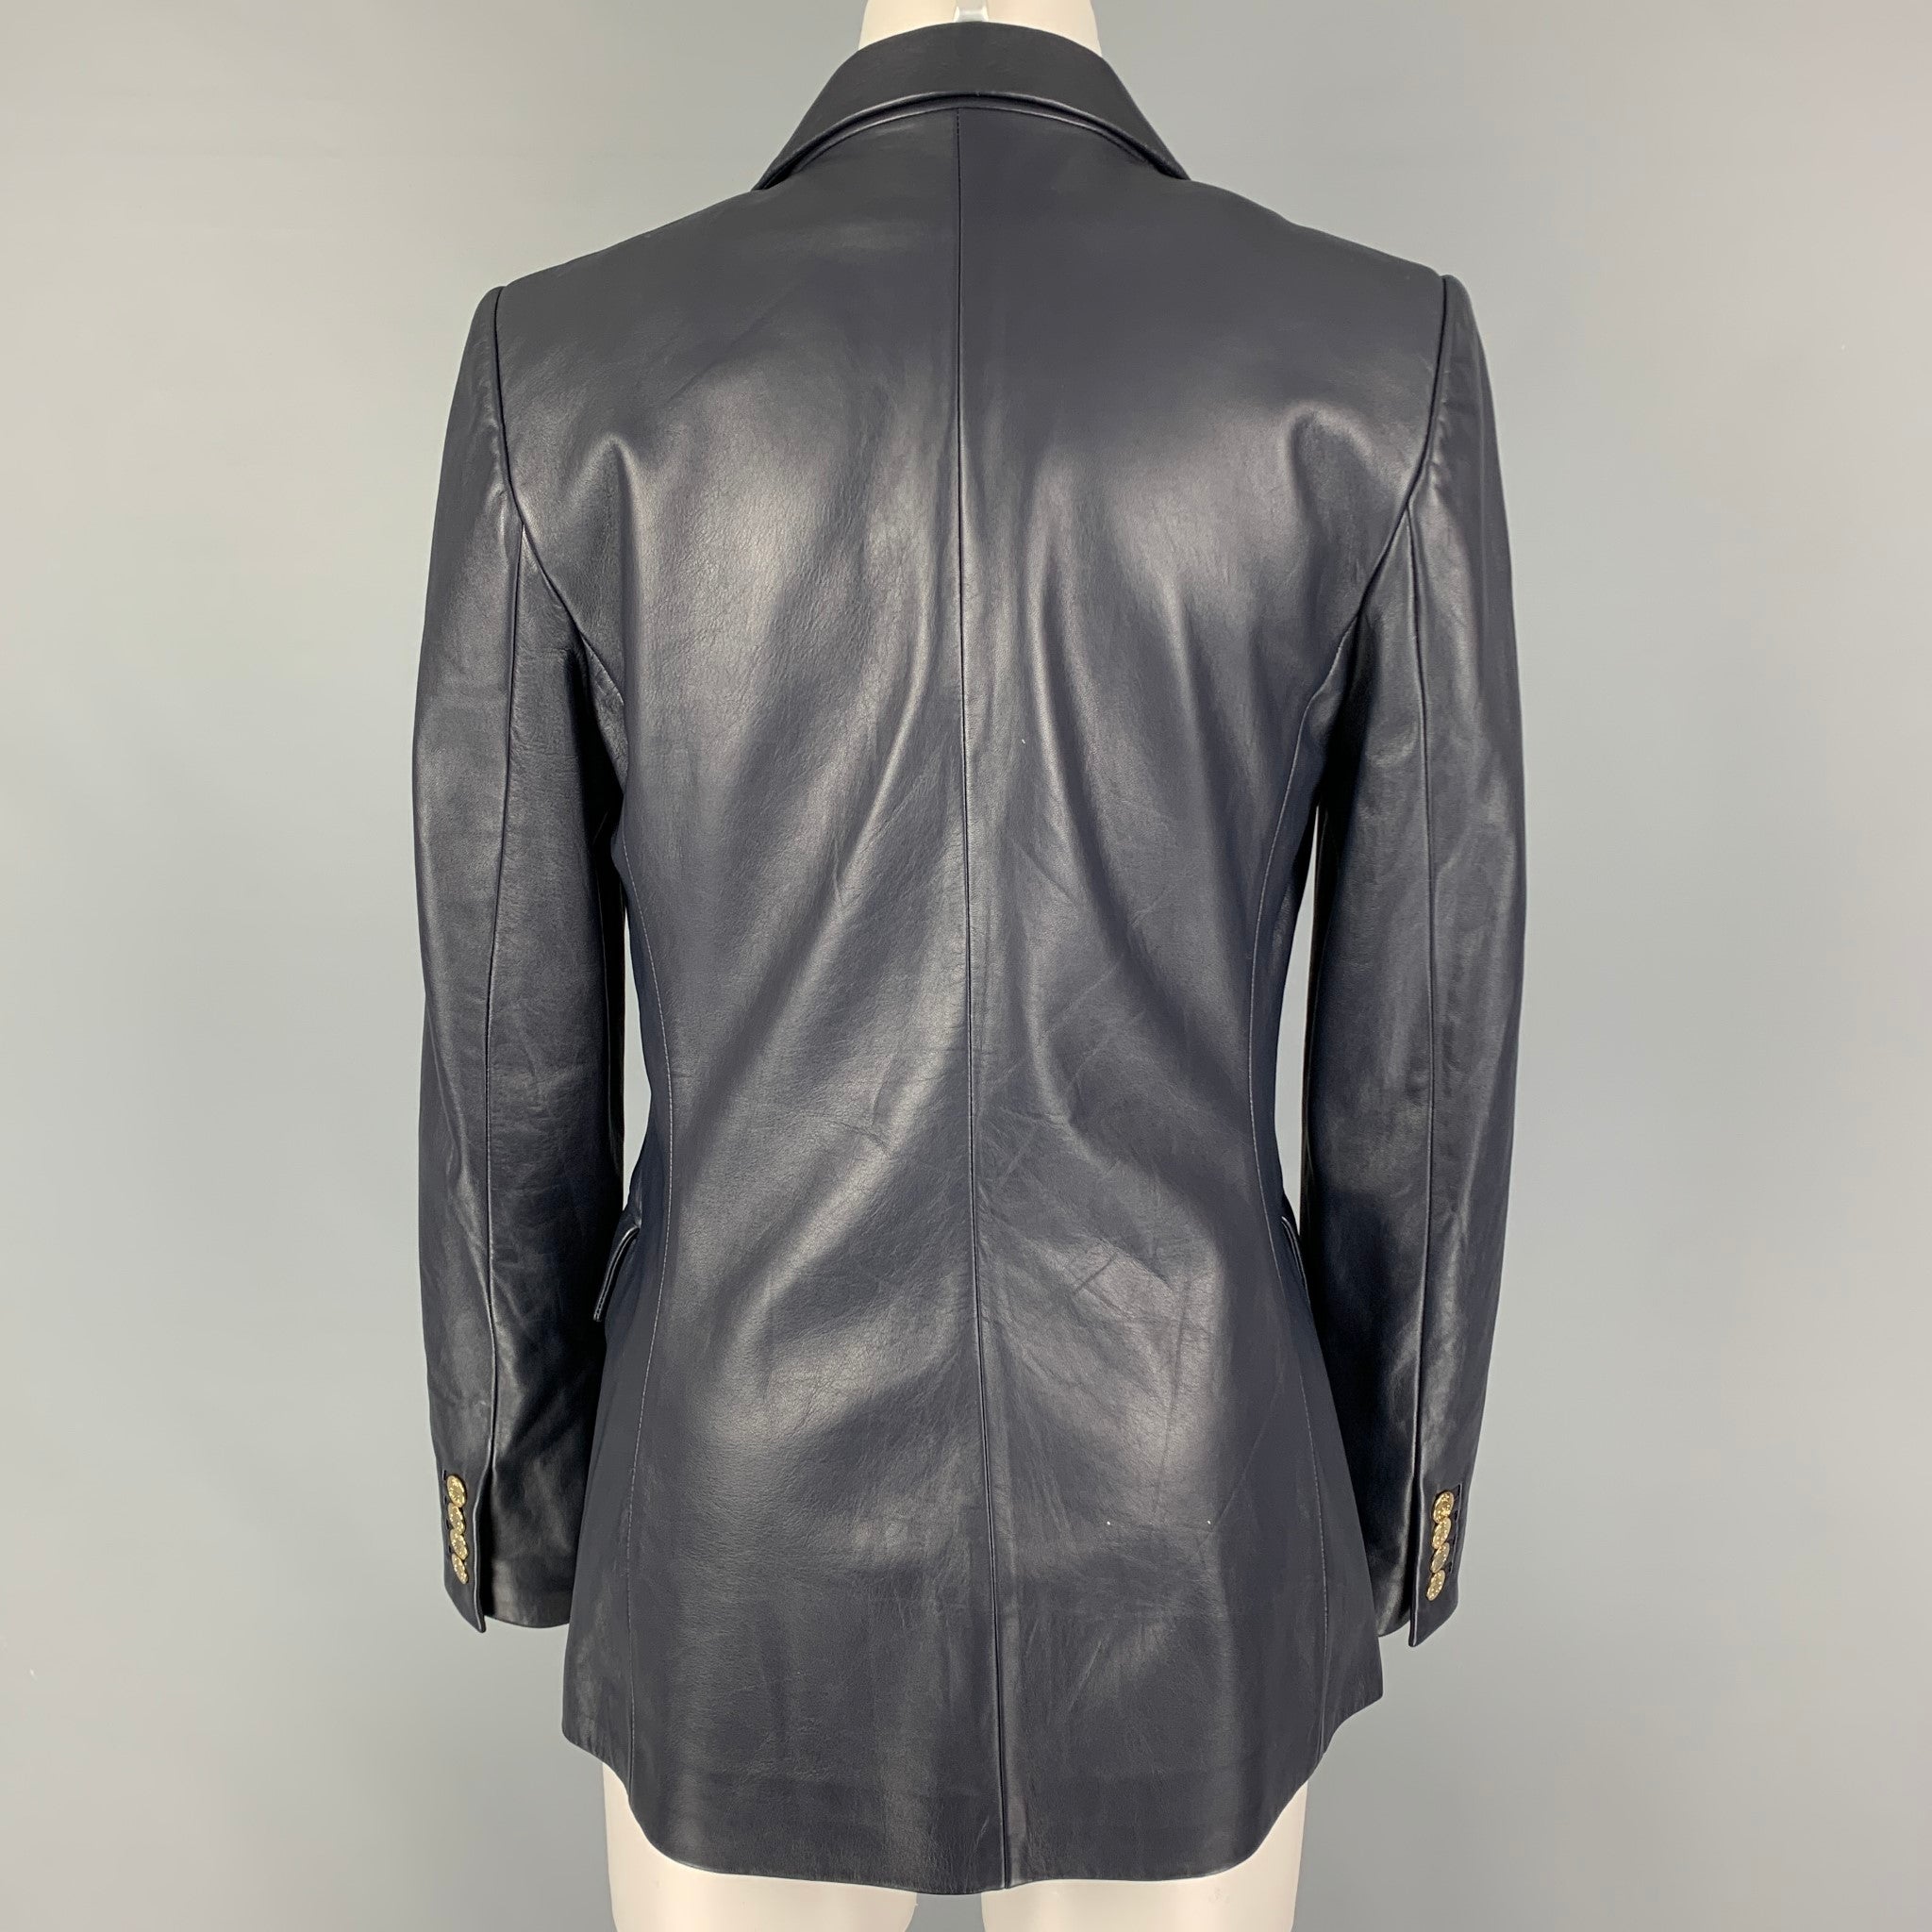 CAMDEN DOUBLE-BREASTED LINED JACKET